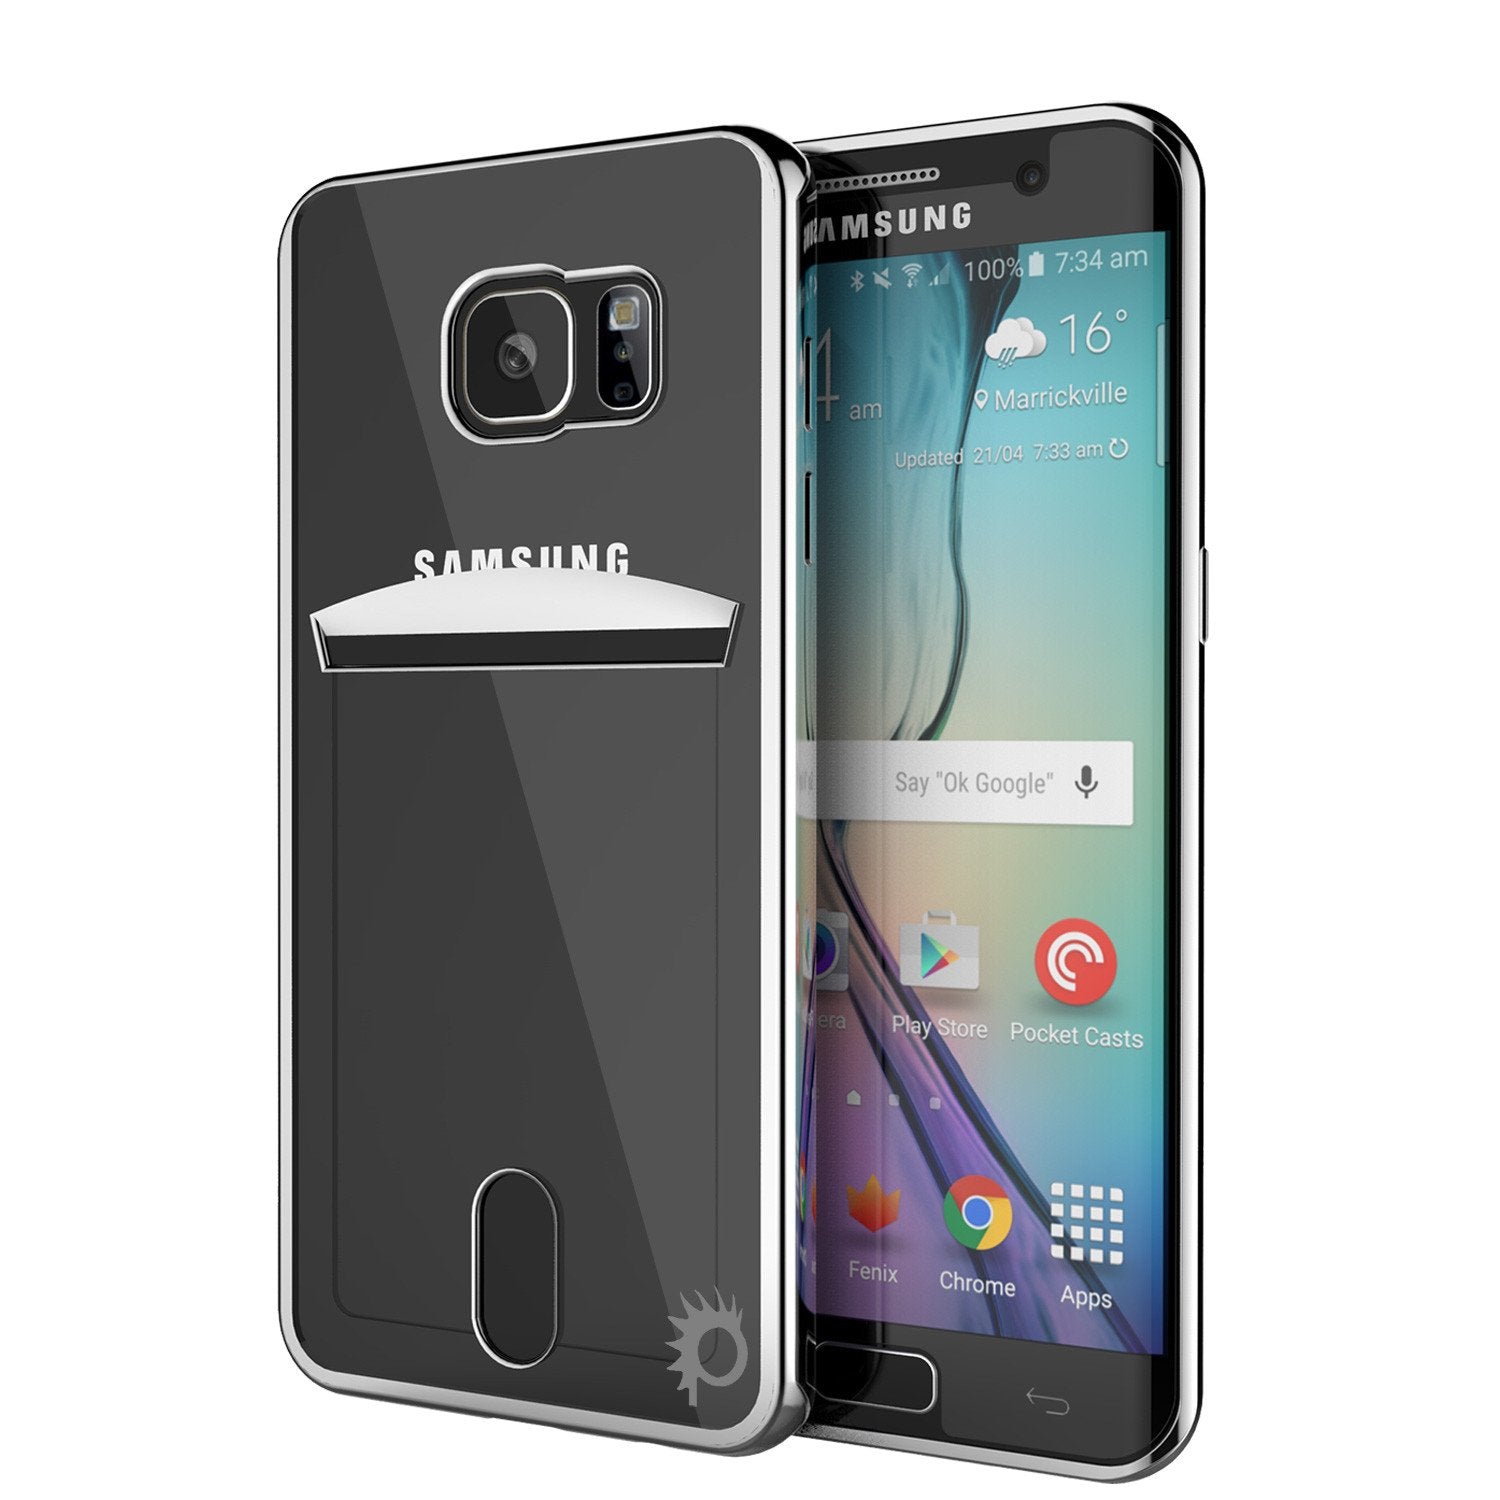 Galaxy S6 Case, PUNKCASE® LUCID Silver Series | Card Slot | SHIELD Screen Protector | Ultra fit